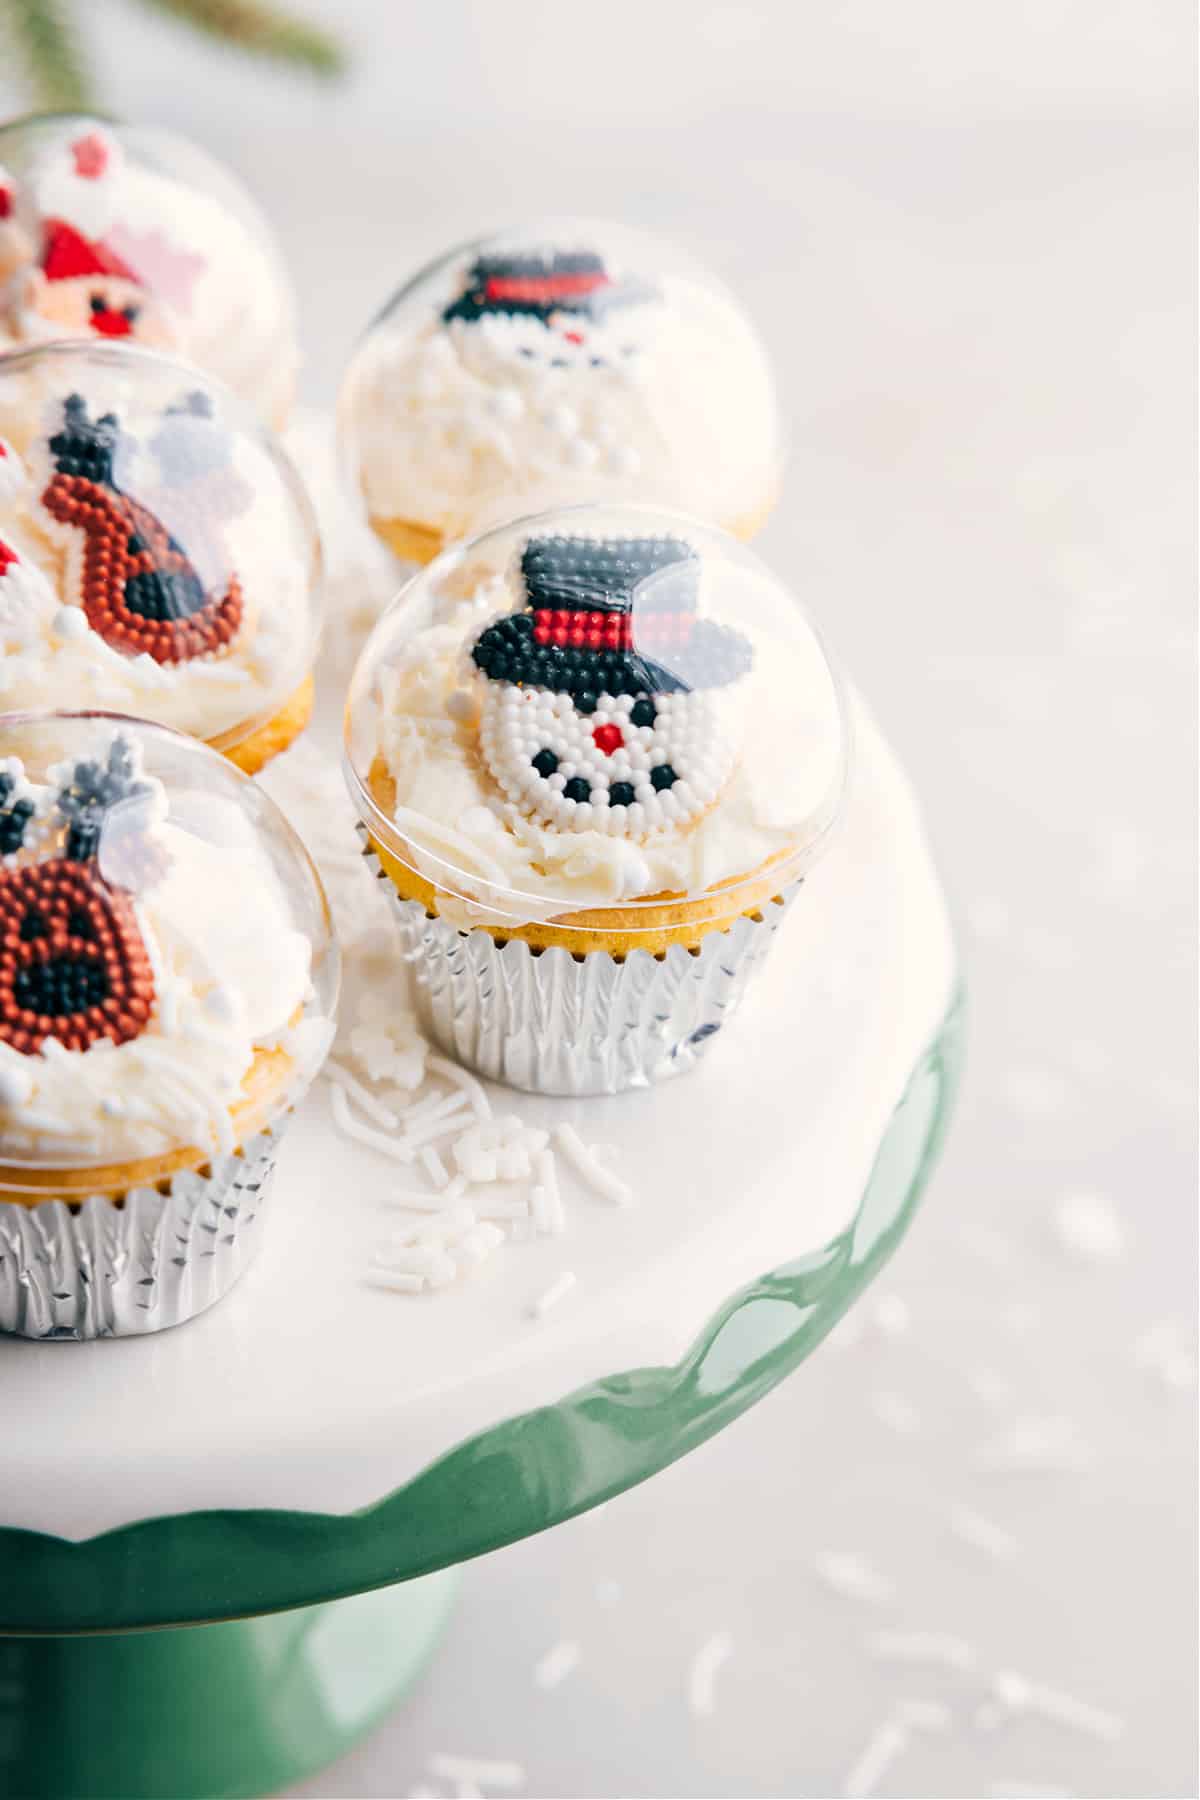 A collection of adorable christmas cupcake ideas, showcasing a variety of festive designs and decorations.